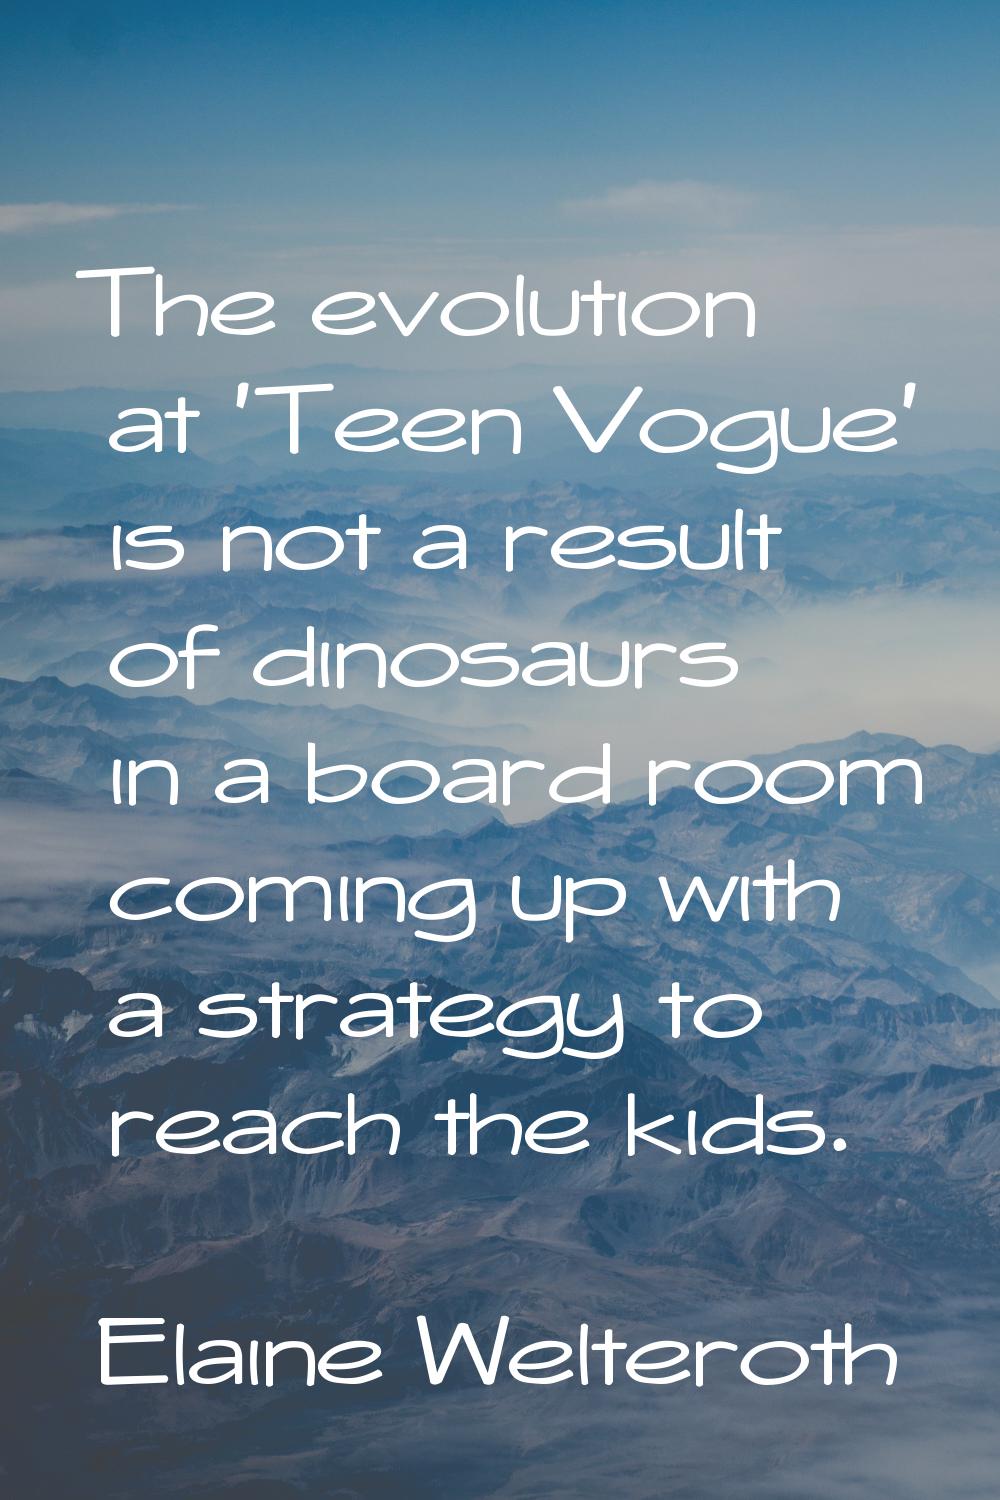 The evolution at 'Teen Vogue' is not a result of dinosaurs in a board room coming up with a strateg